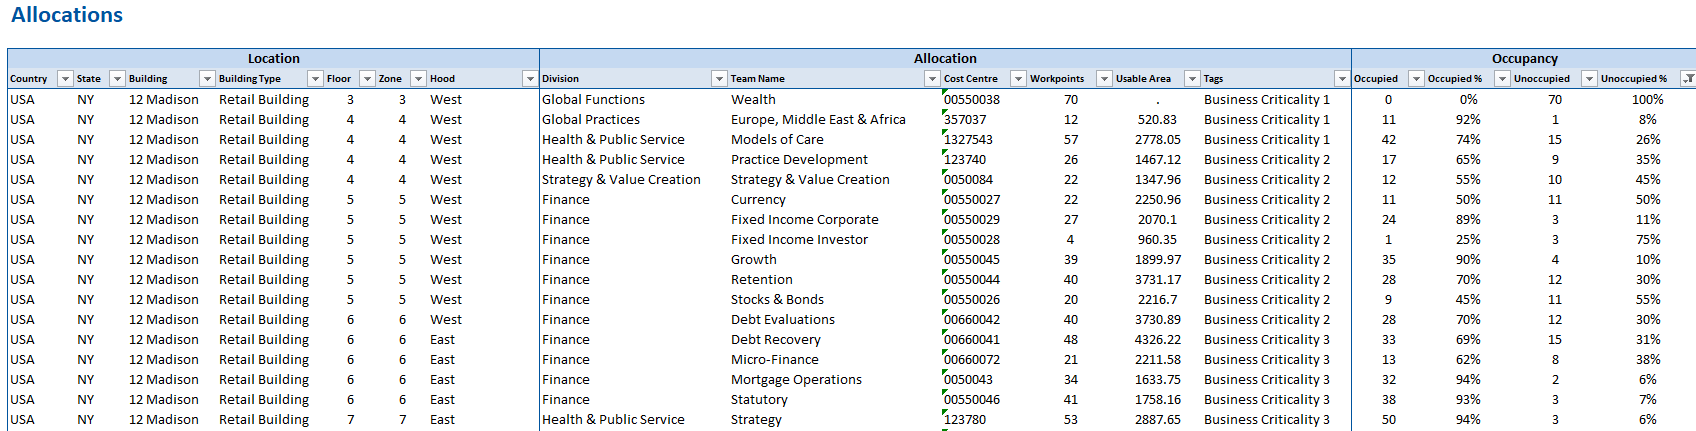 Back2Work - Allocations with tags report.PNG